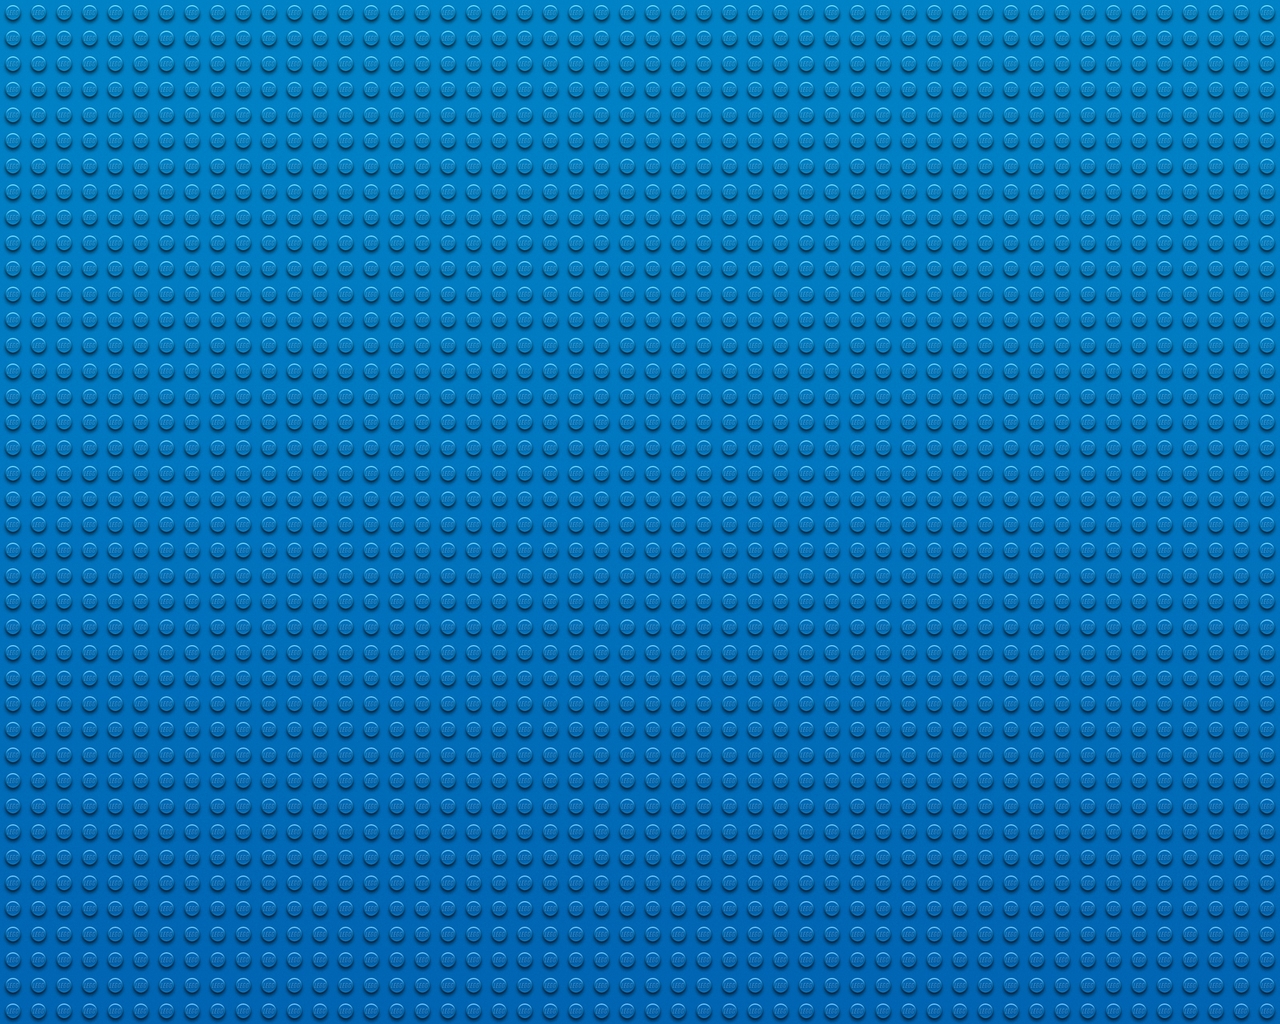 Lego Texture for 1280 x 1024 resolution